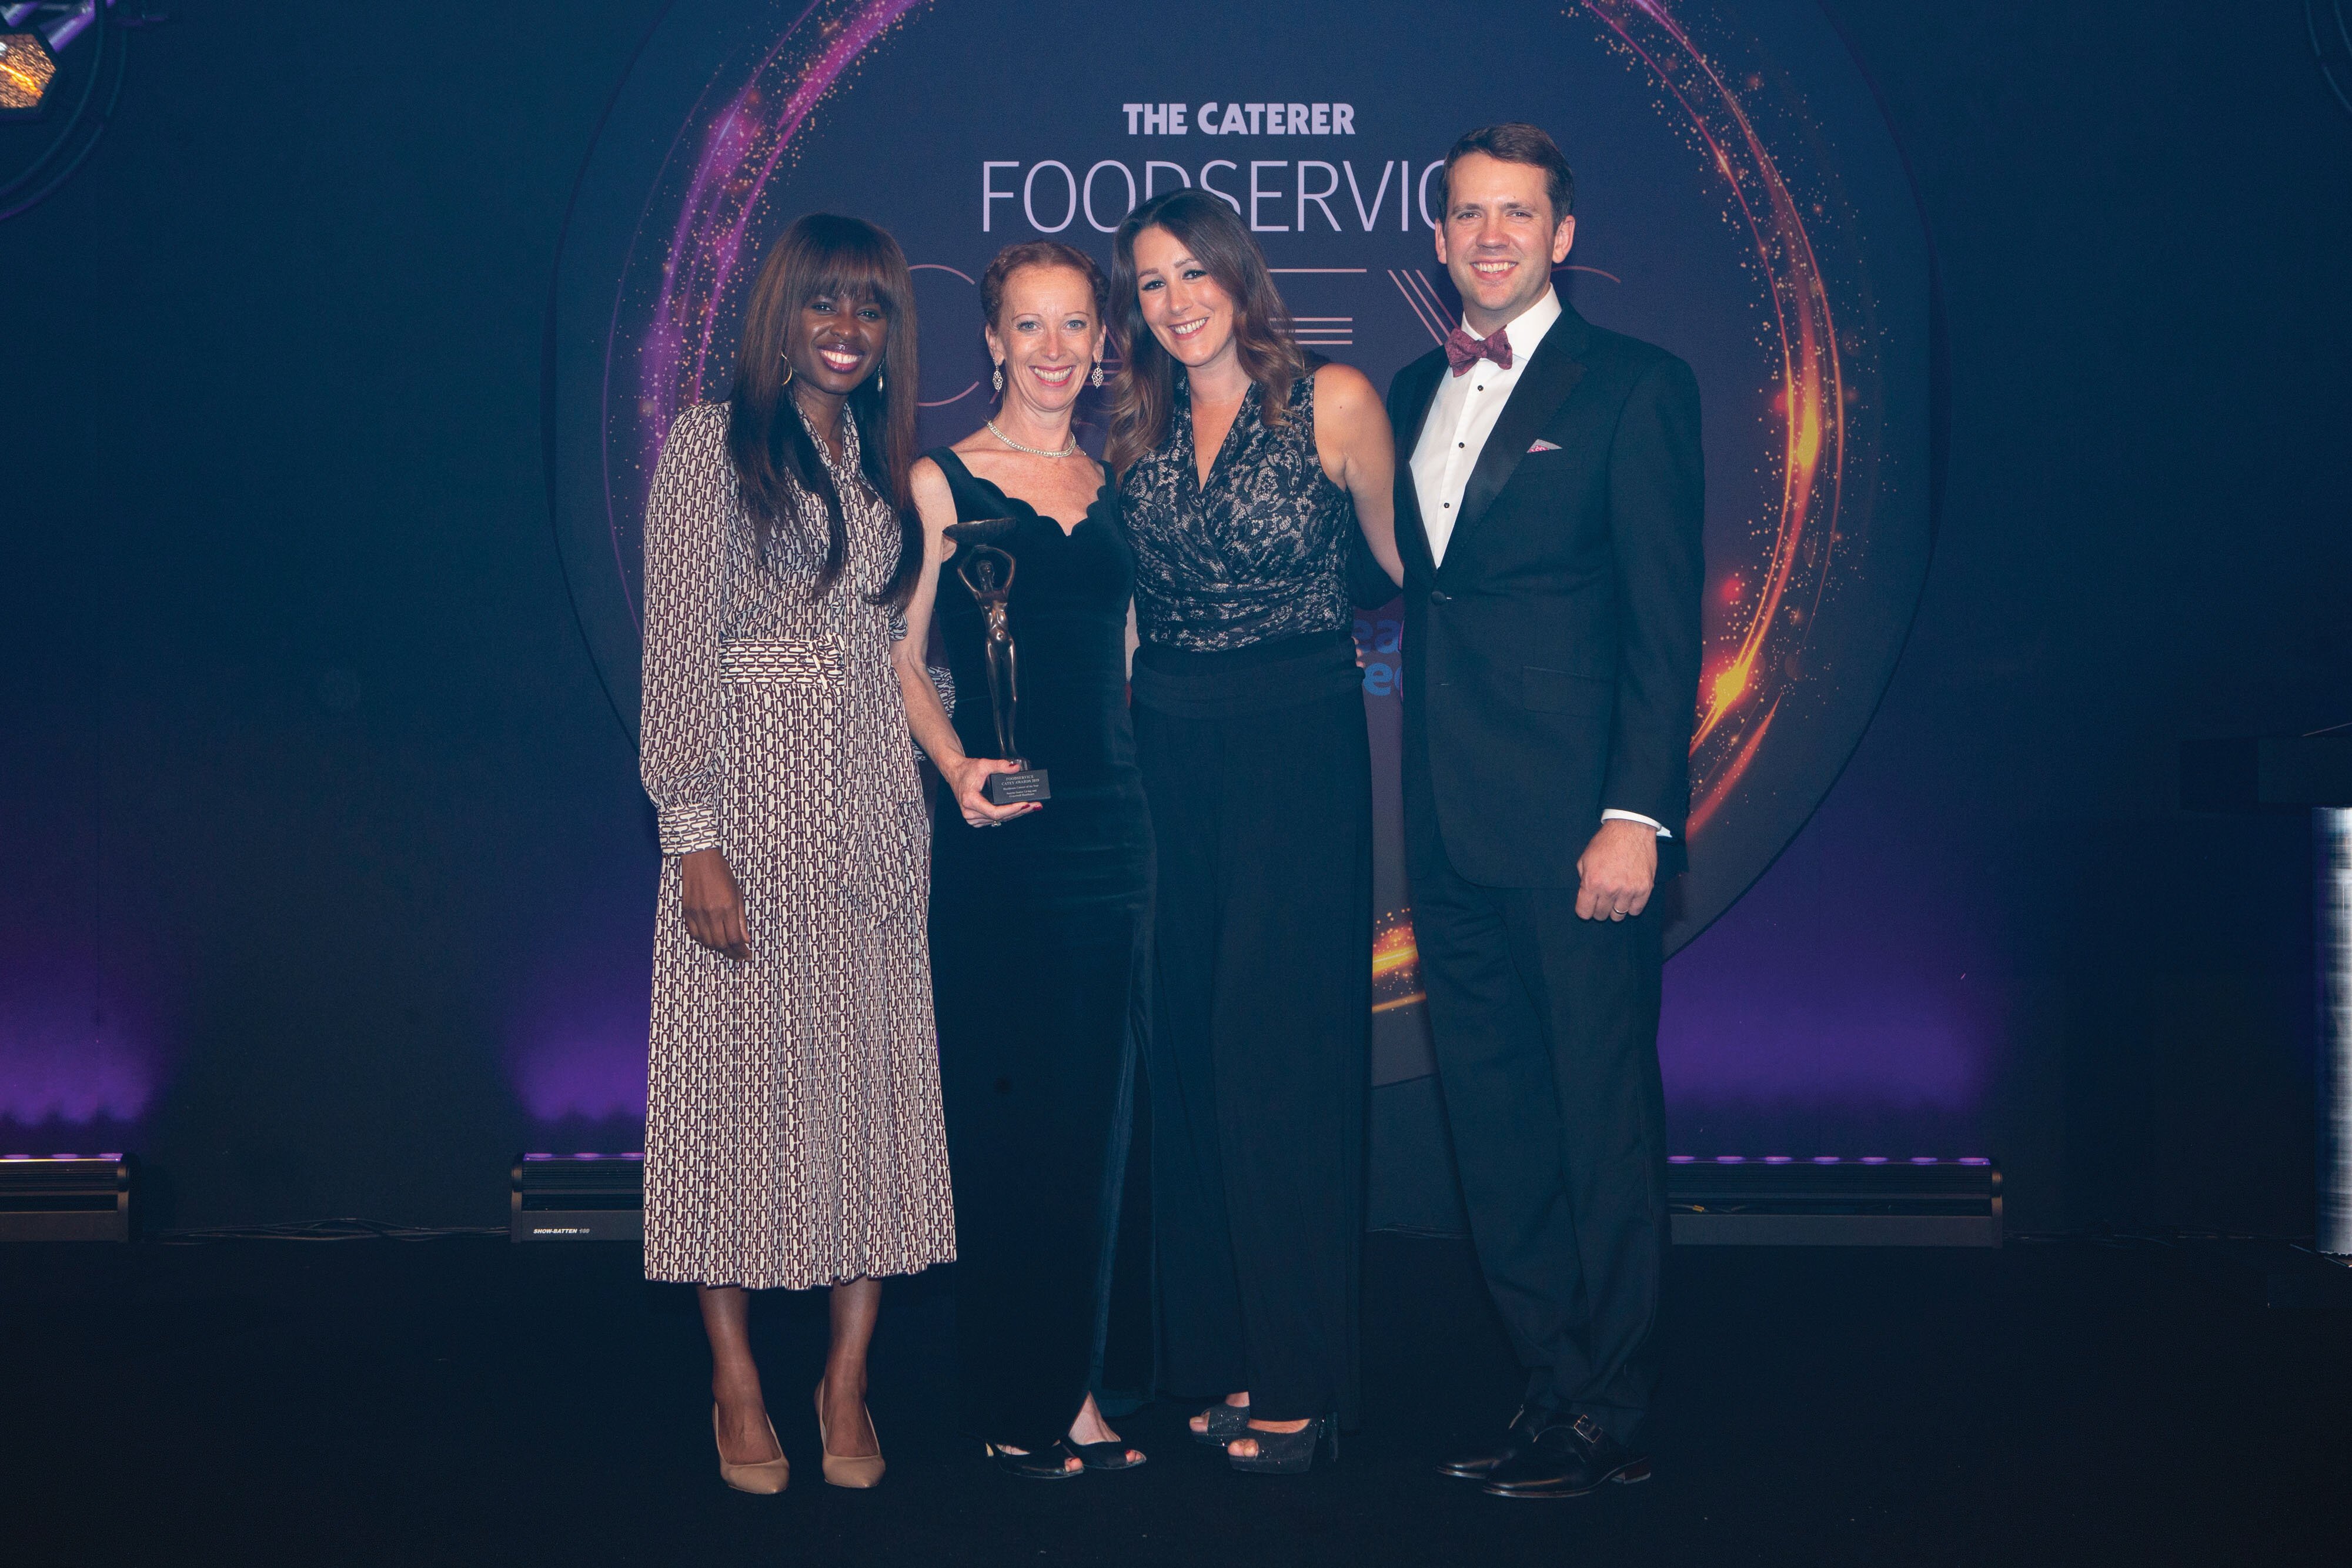 Foodservice Cateys 2019: Healthcare Caterer of the Year – Sunrise Senior Living